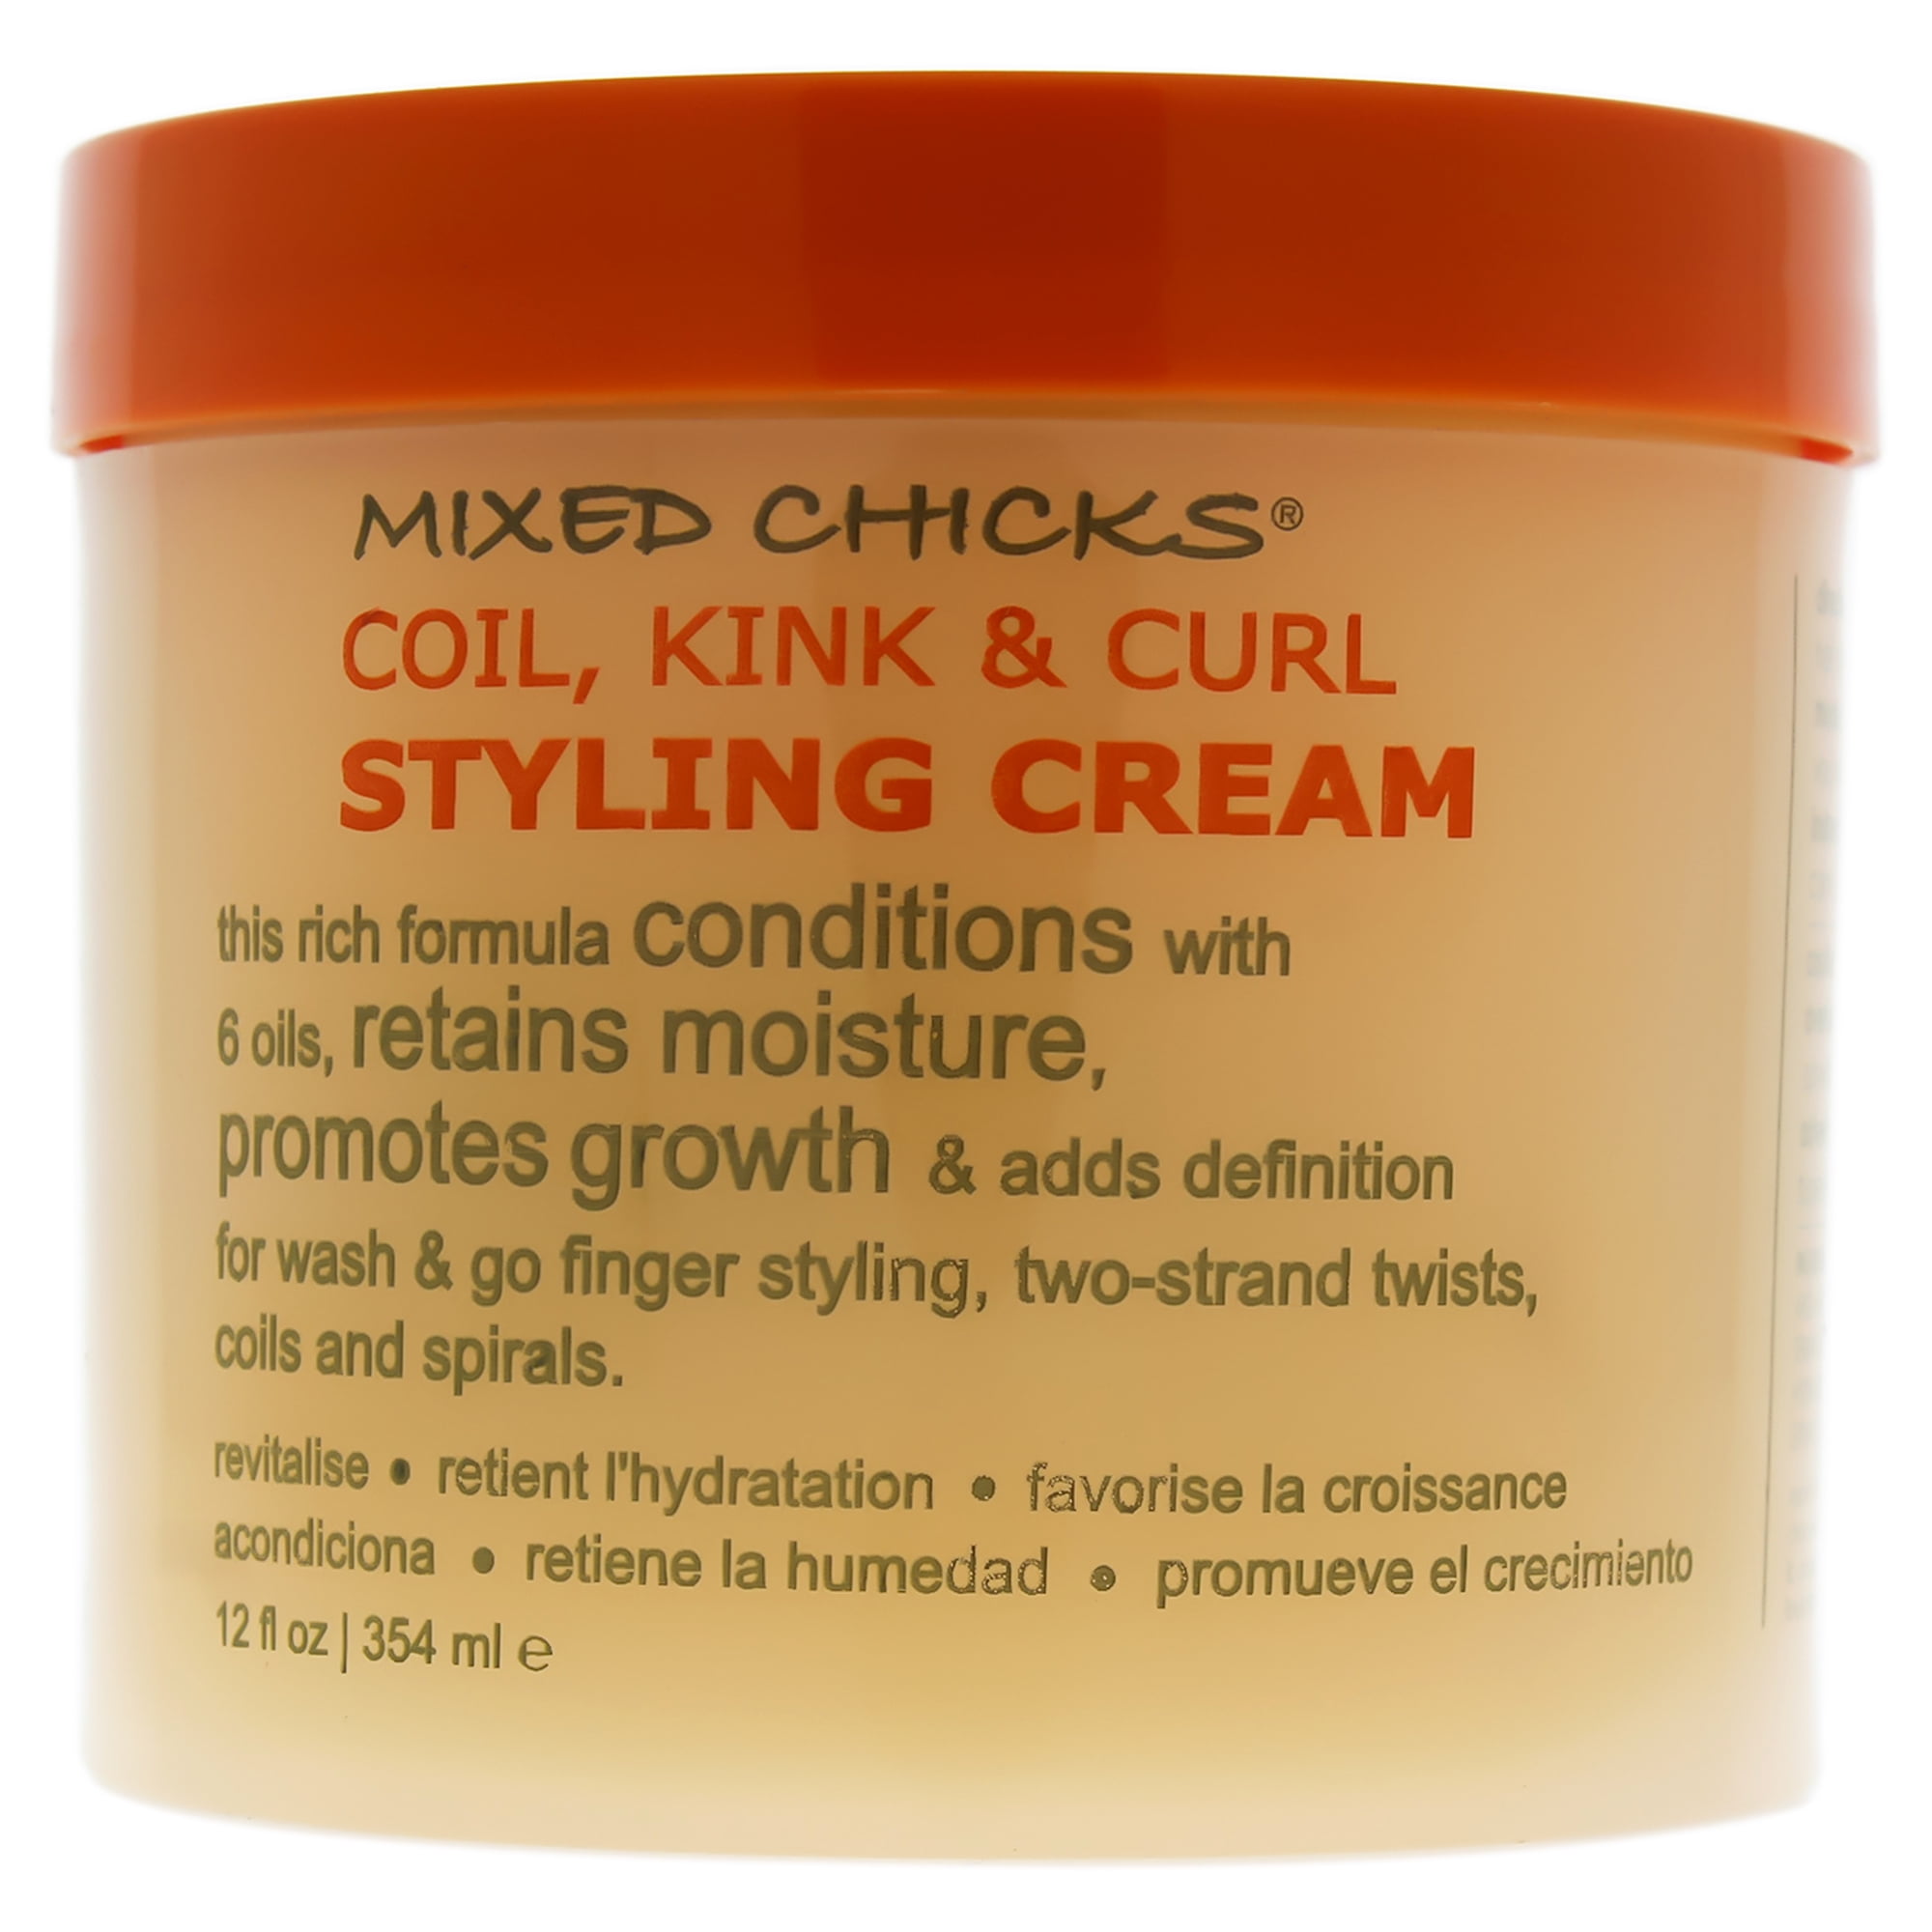 Mixed Chicks Coil Kink and Curl Styling Cream - 12 oz Cream - Walmart.com